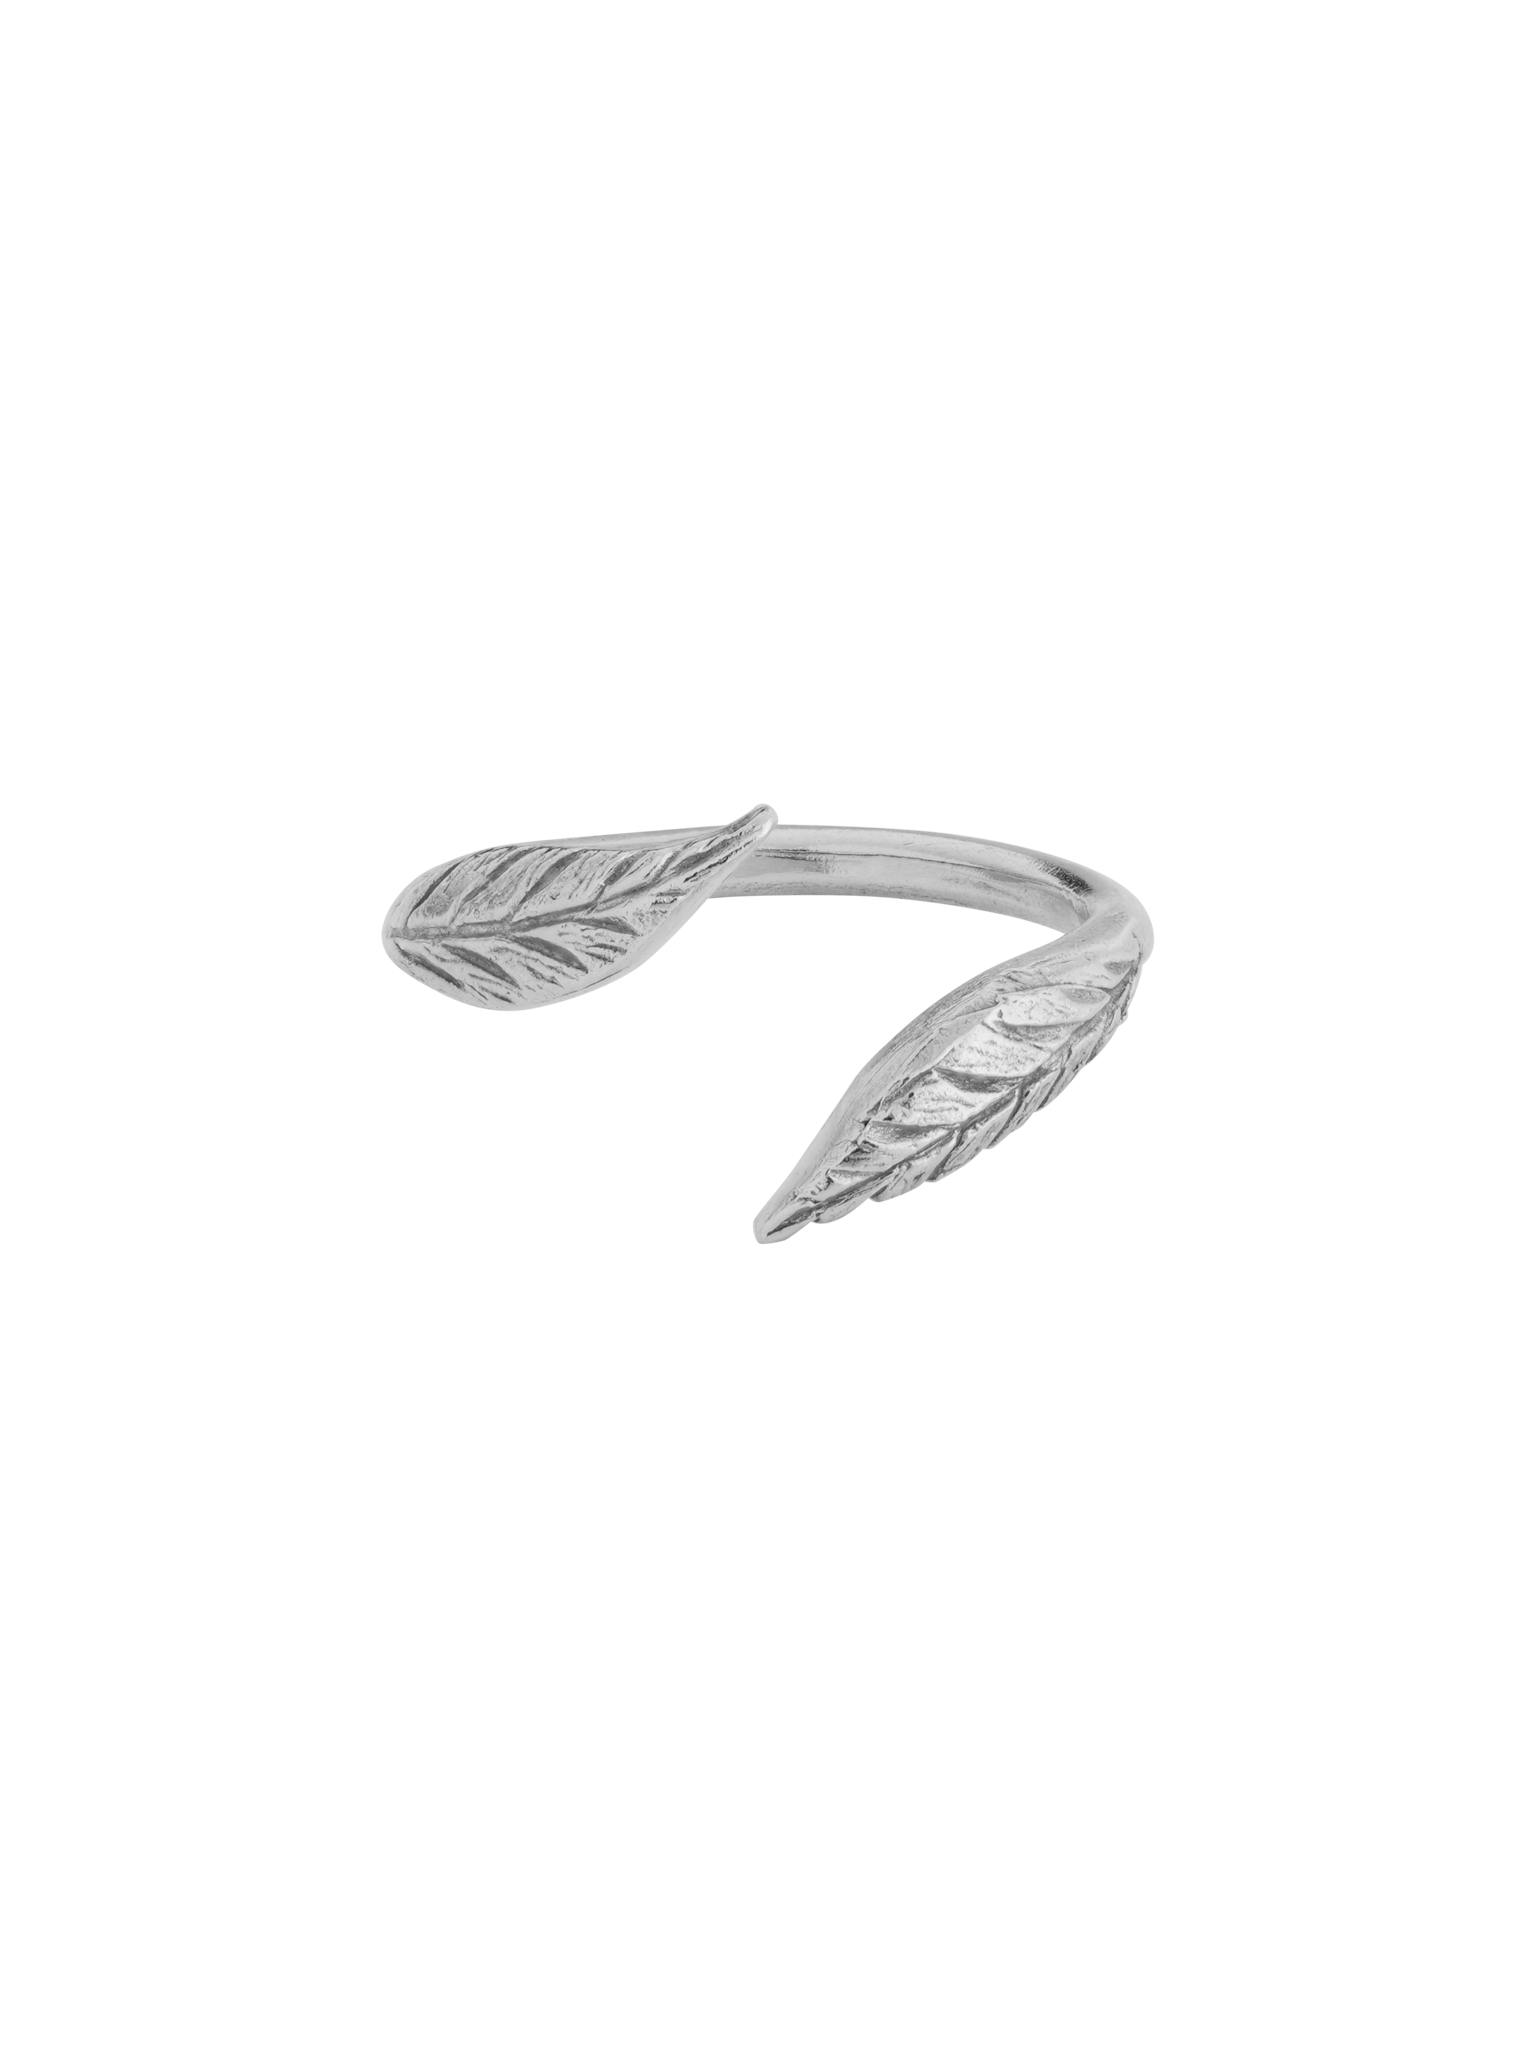 The open leaf ring